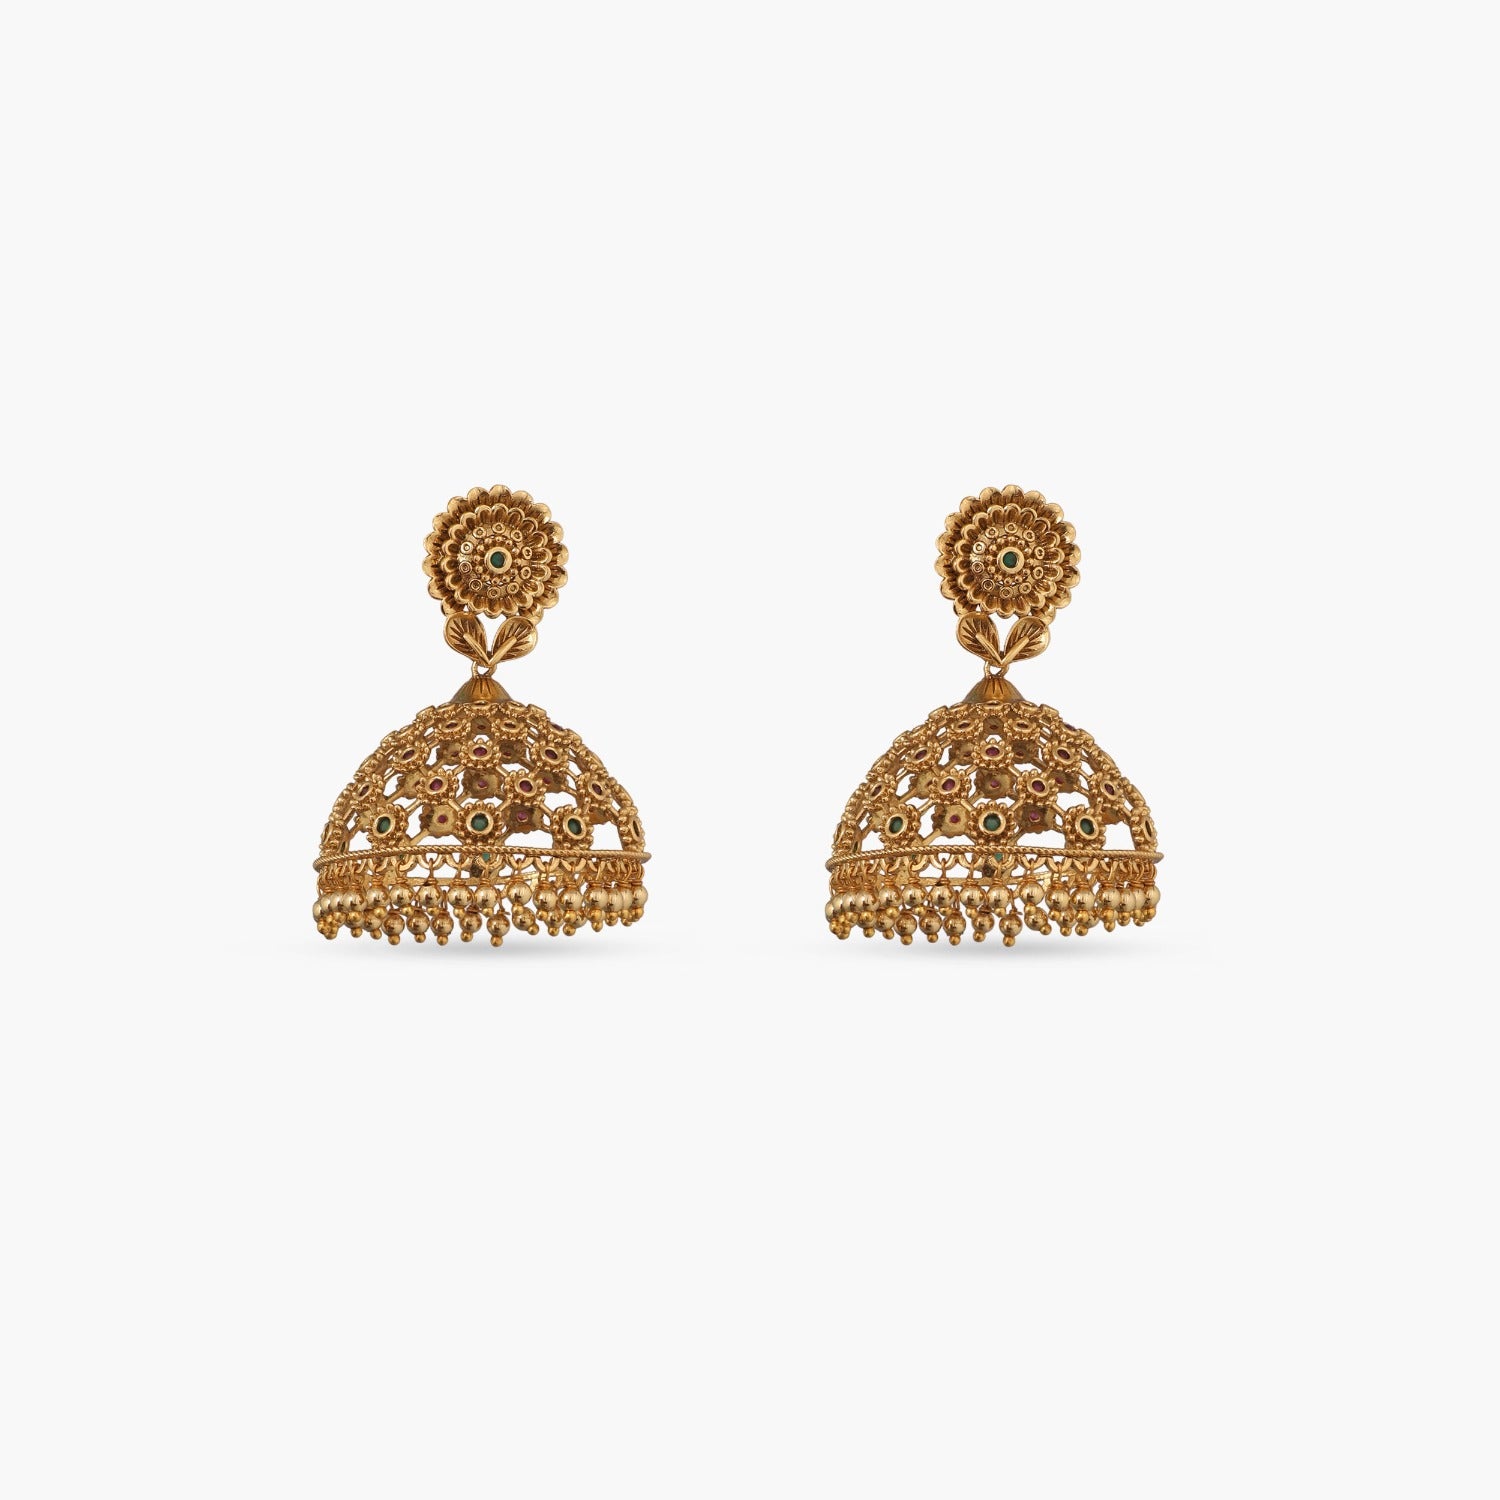 Sheza Pipal Patti Traditional Antique Gold Plated Earrings – KaurzCrown.com